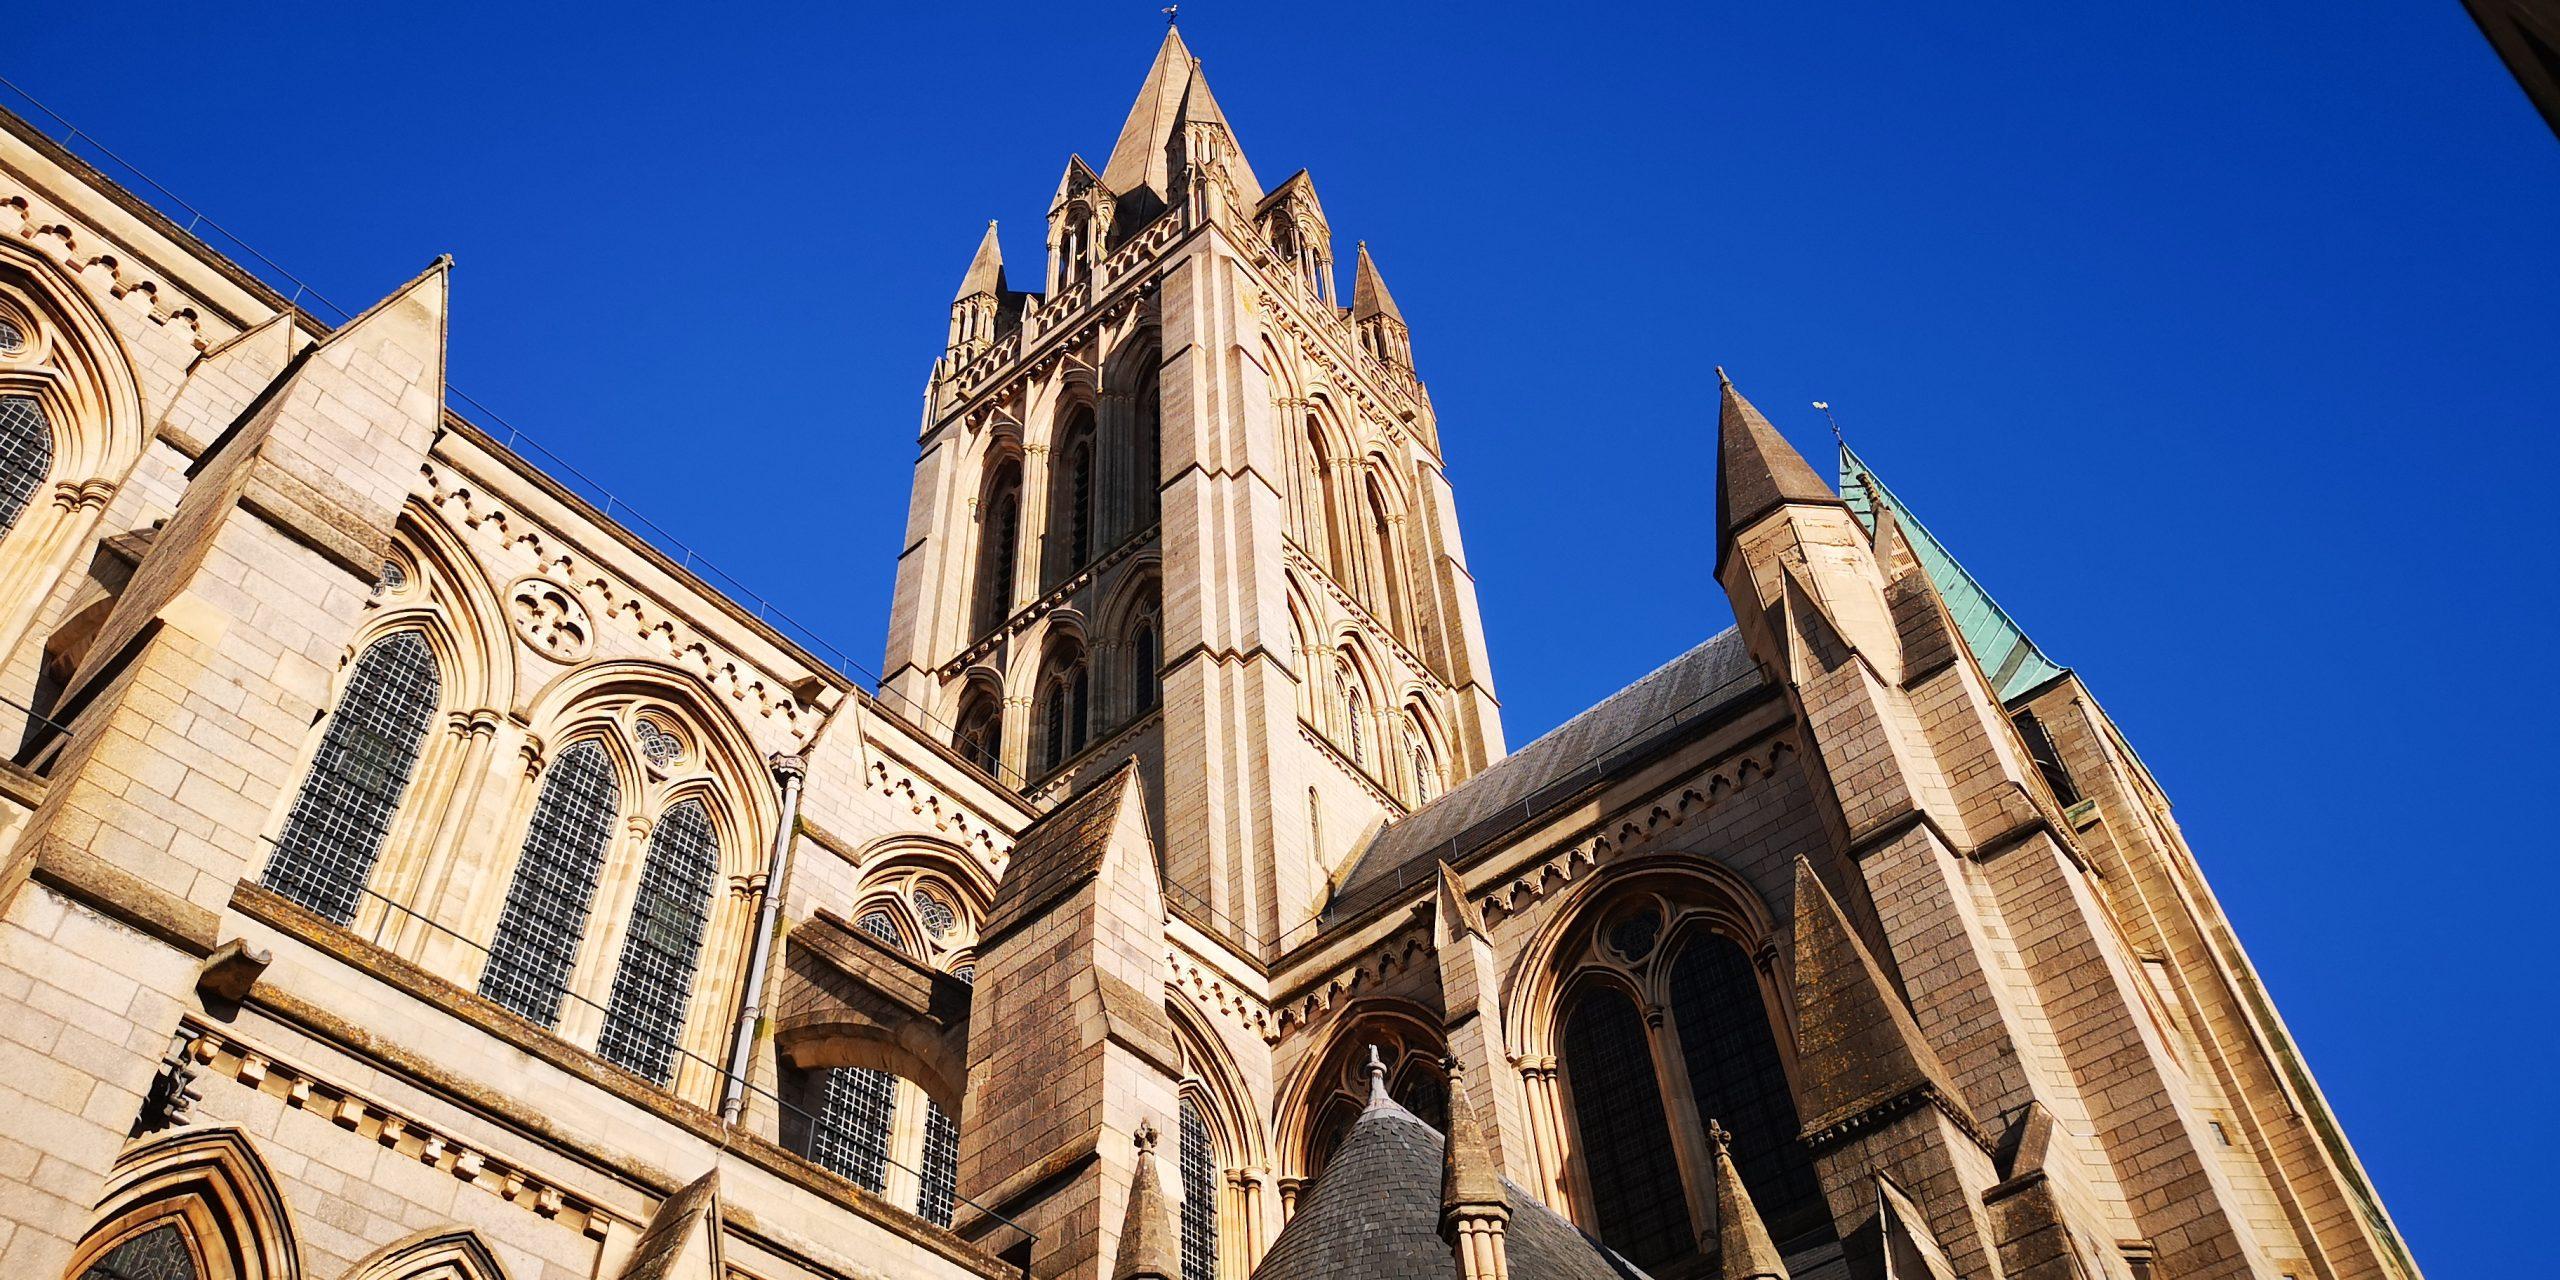 Truro Cathedral spires